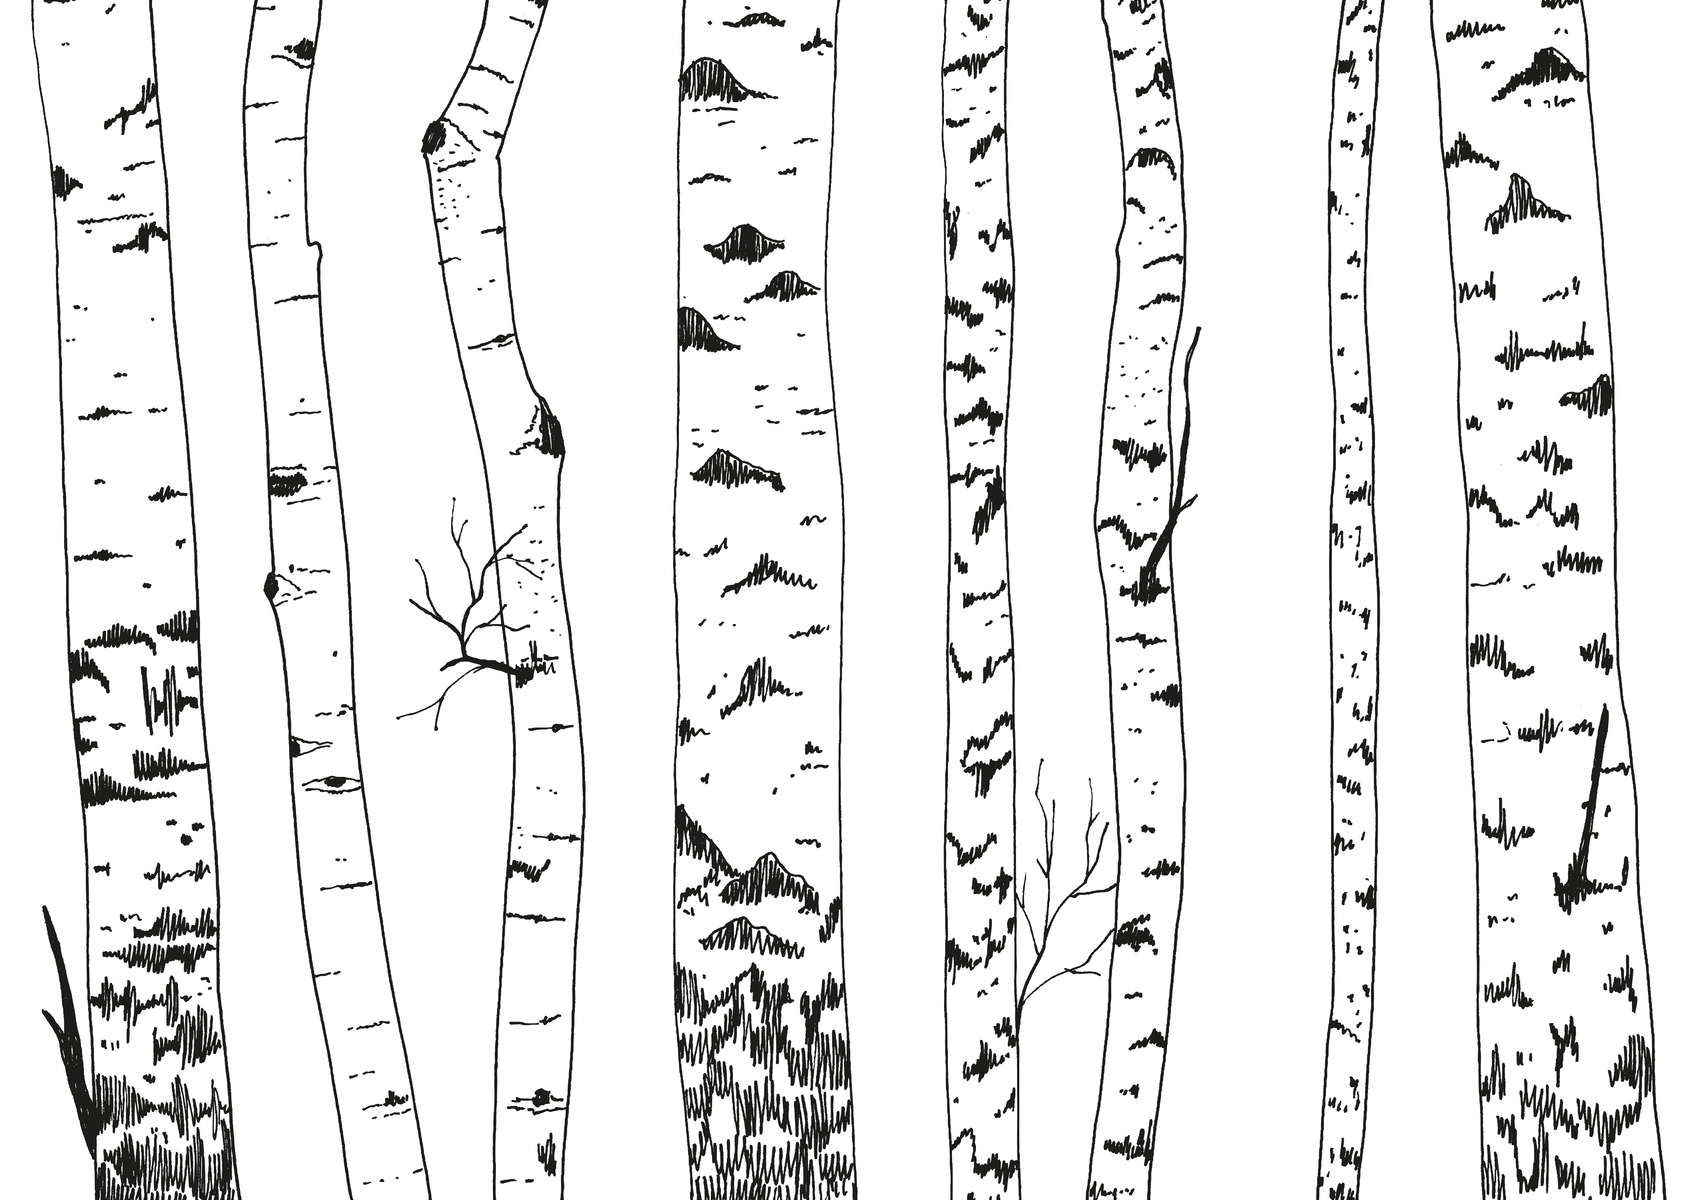             Photo wallpaper drawn birch forest - smooth & slightly shiny non-woven
        